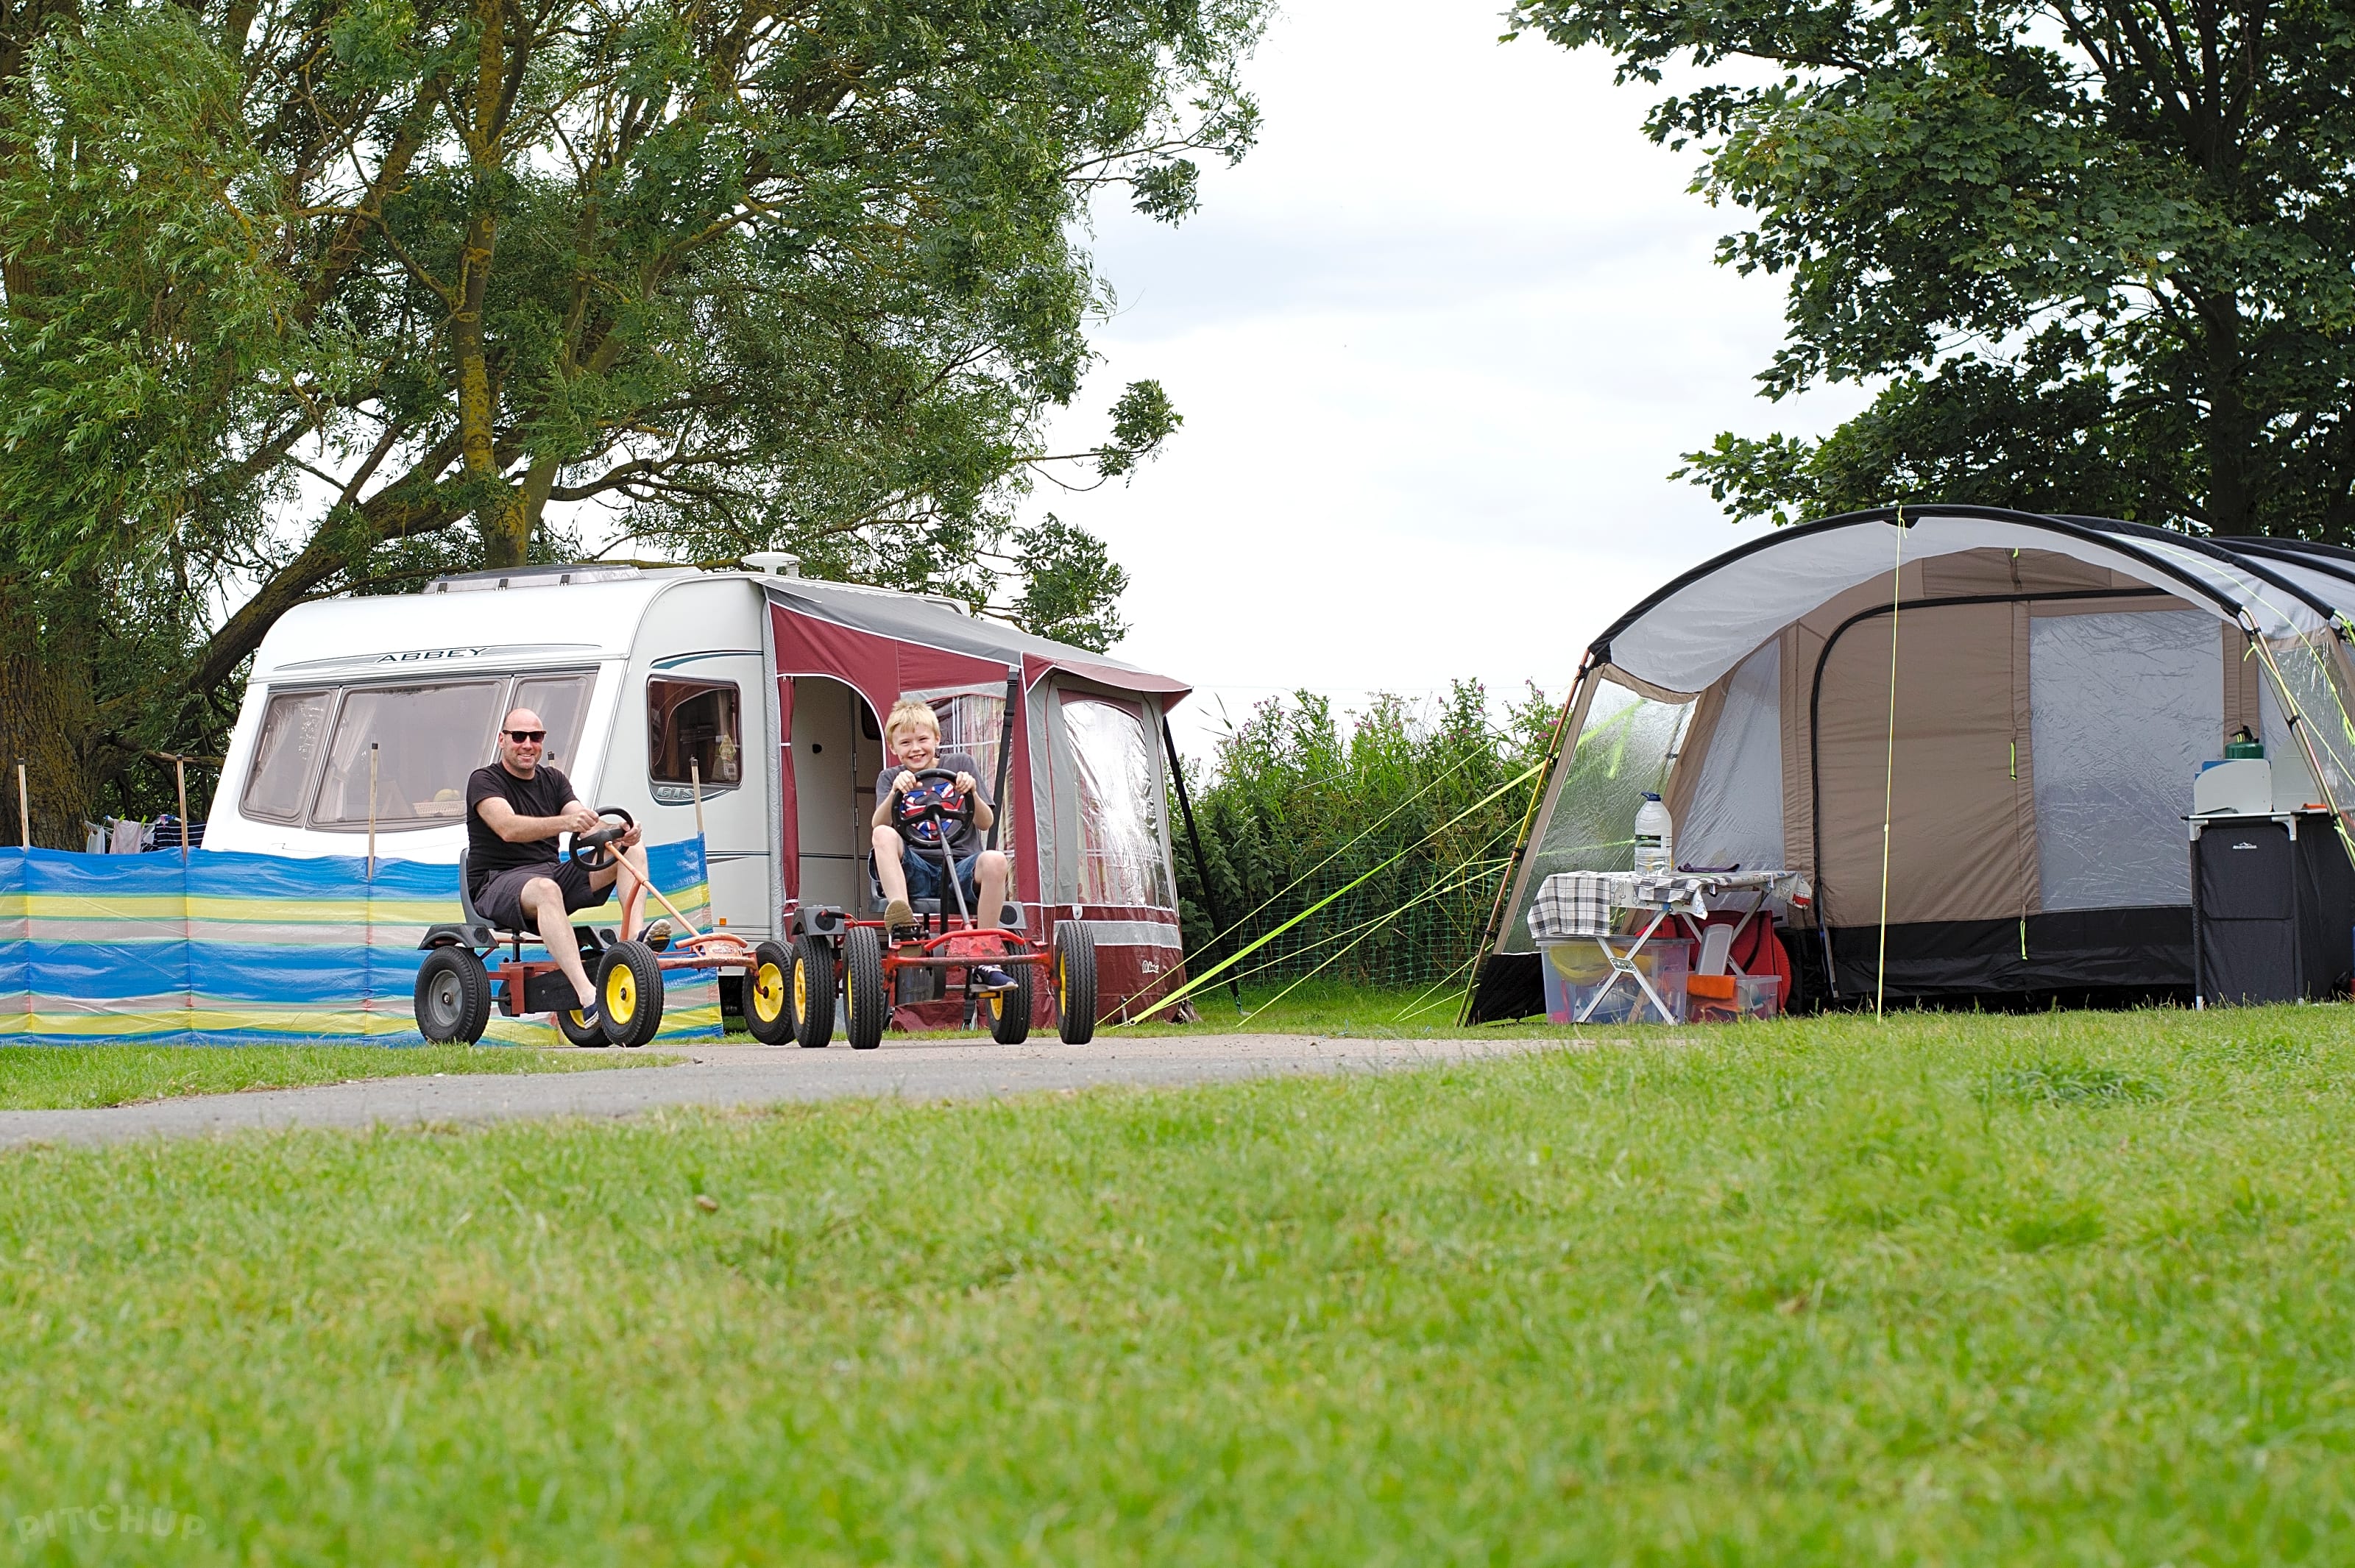 Kessingland Beach Holiday Park, Lowestoft - Updated 2021 prices - Pitchup®